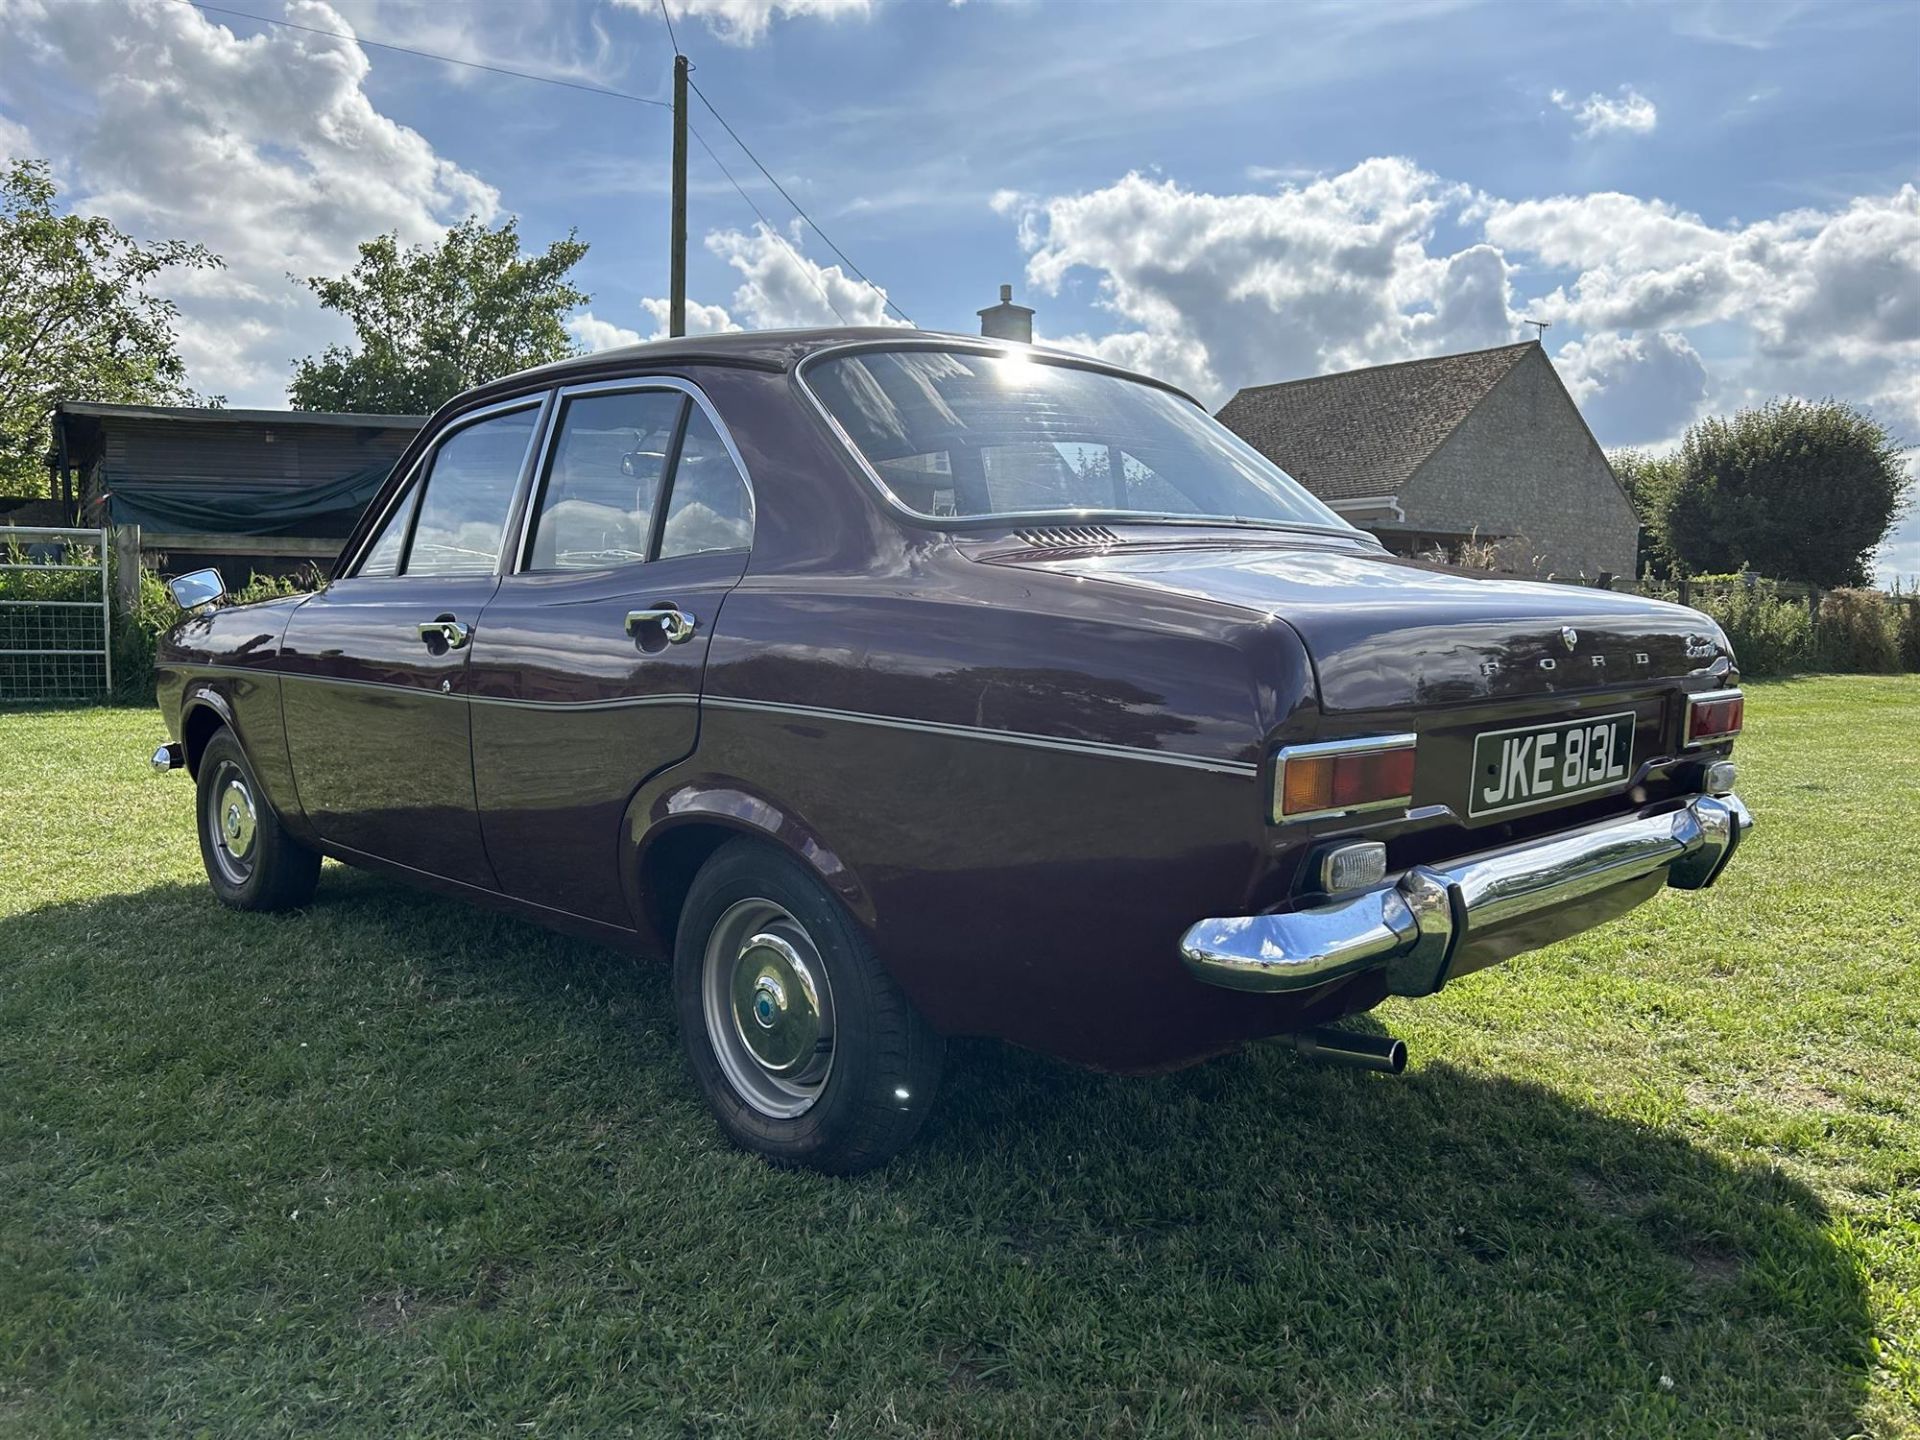 1973 Ford Escort 1300 XL - Image 6 of 10